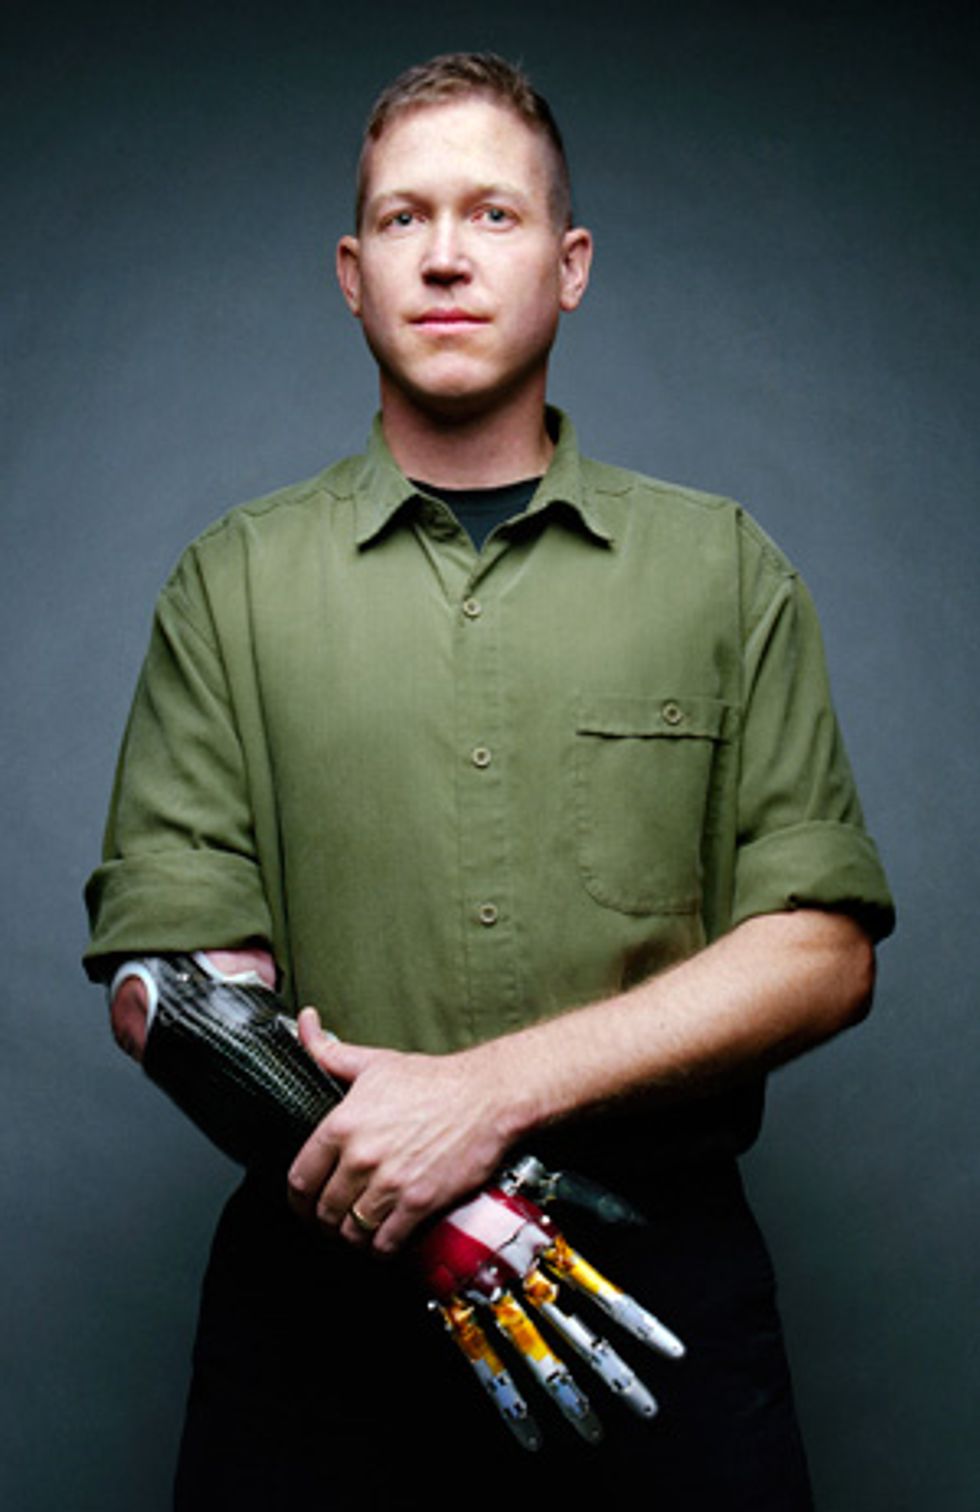 Jonathan Kuniholm wears a prototype of the prosthetic arm created by DARPA